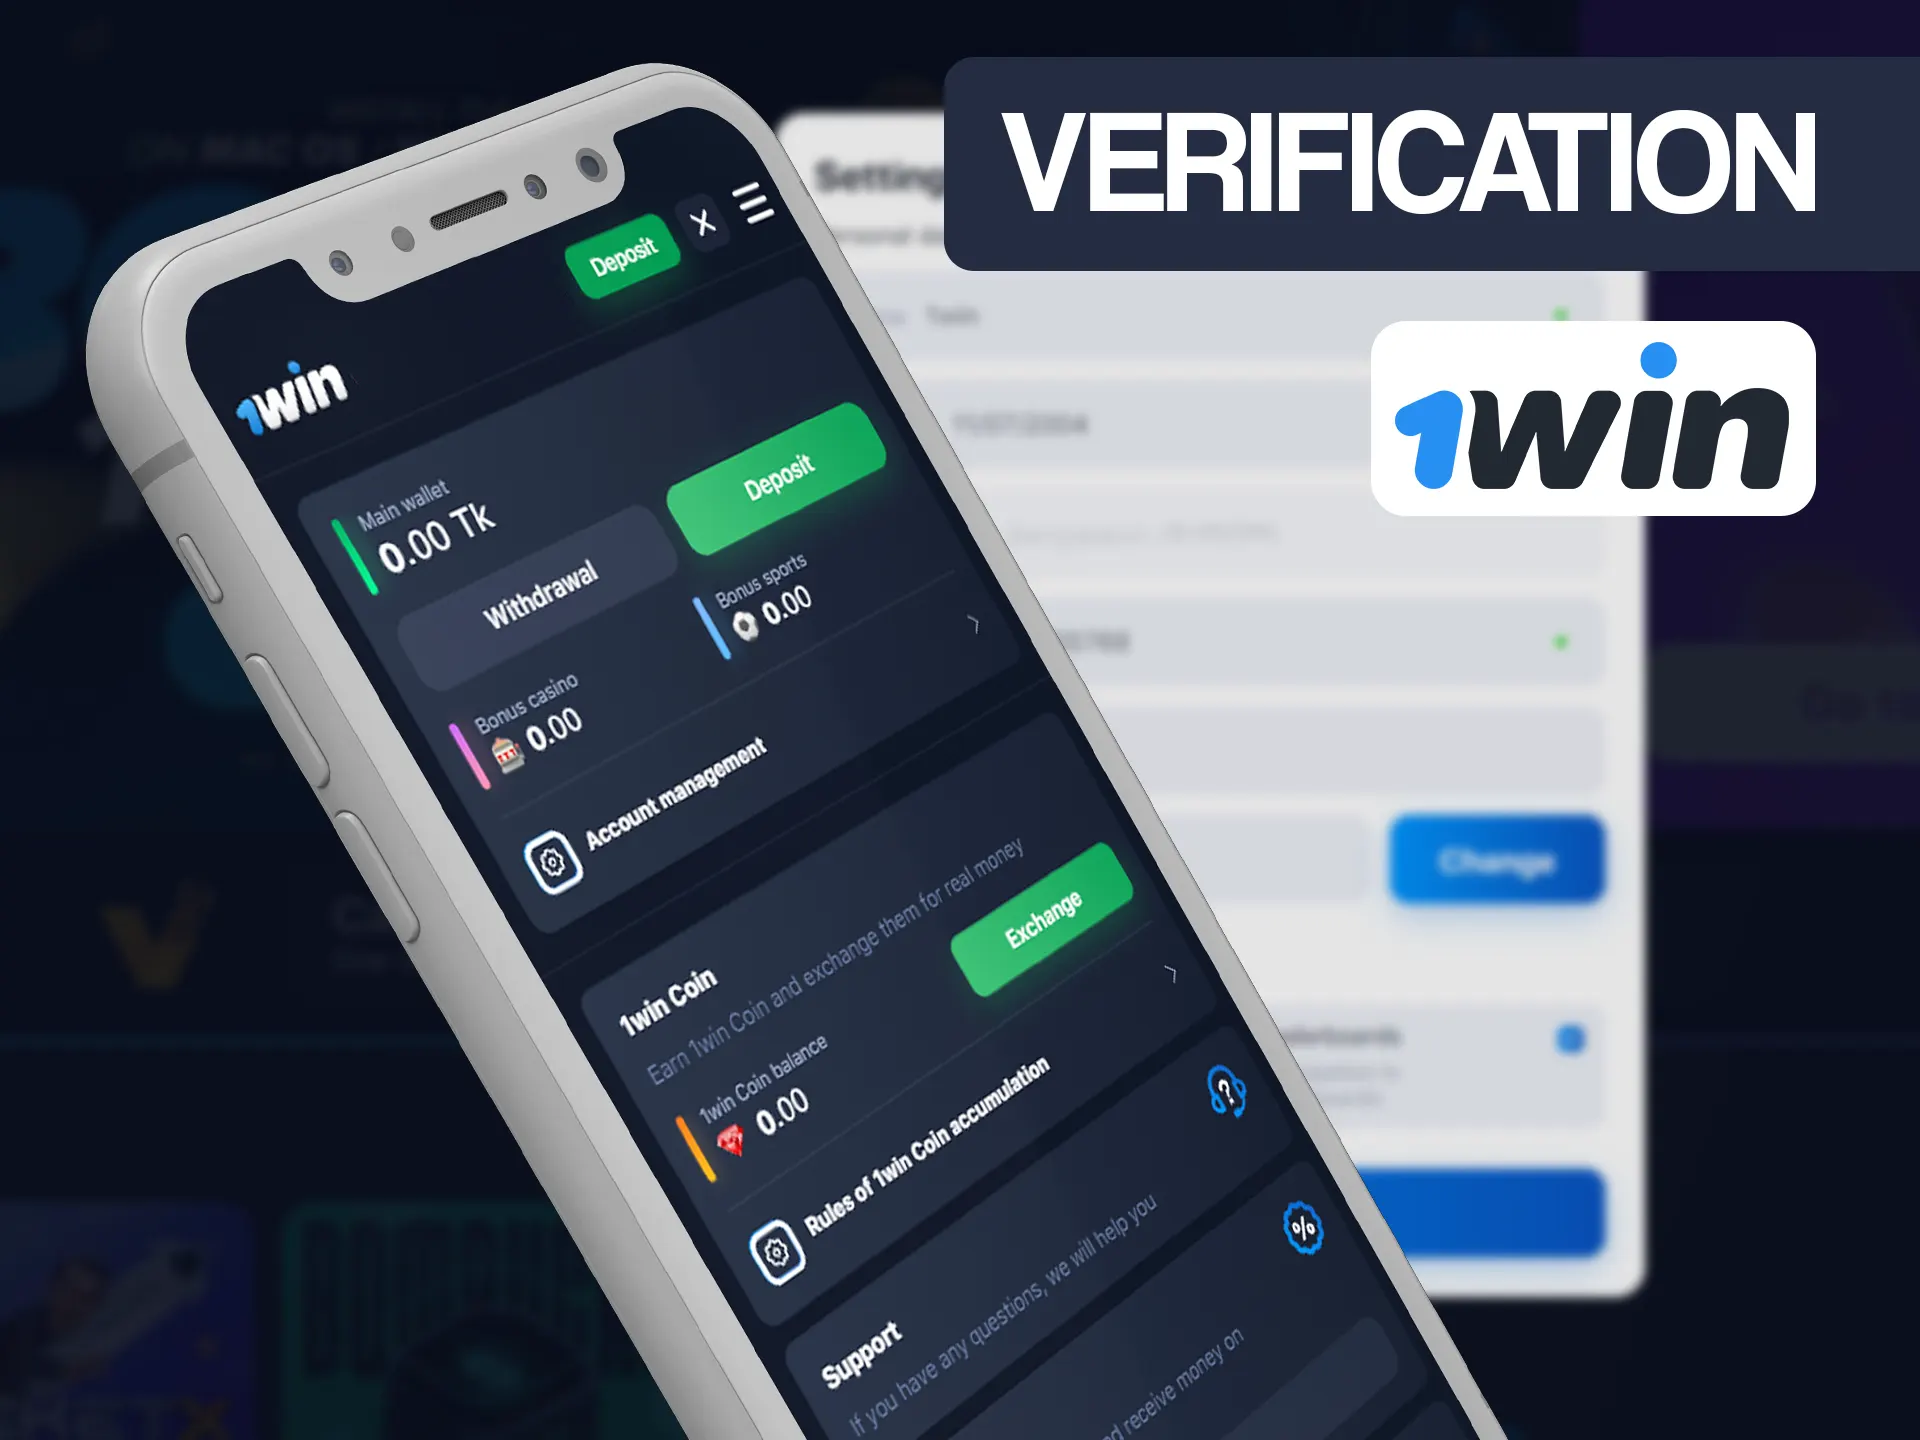 Verify your 1win account by providing required data.